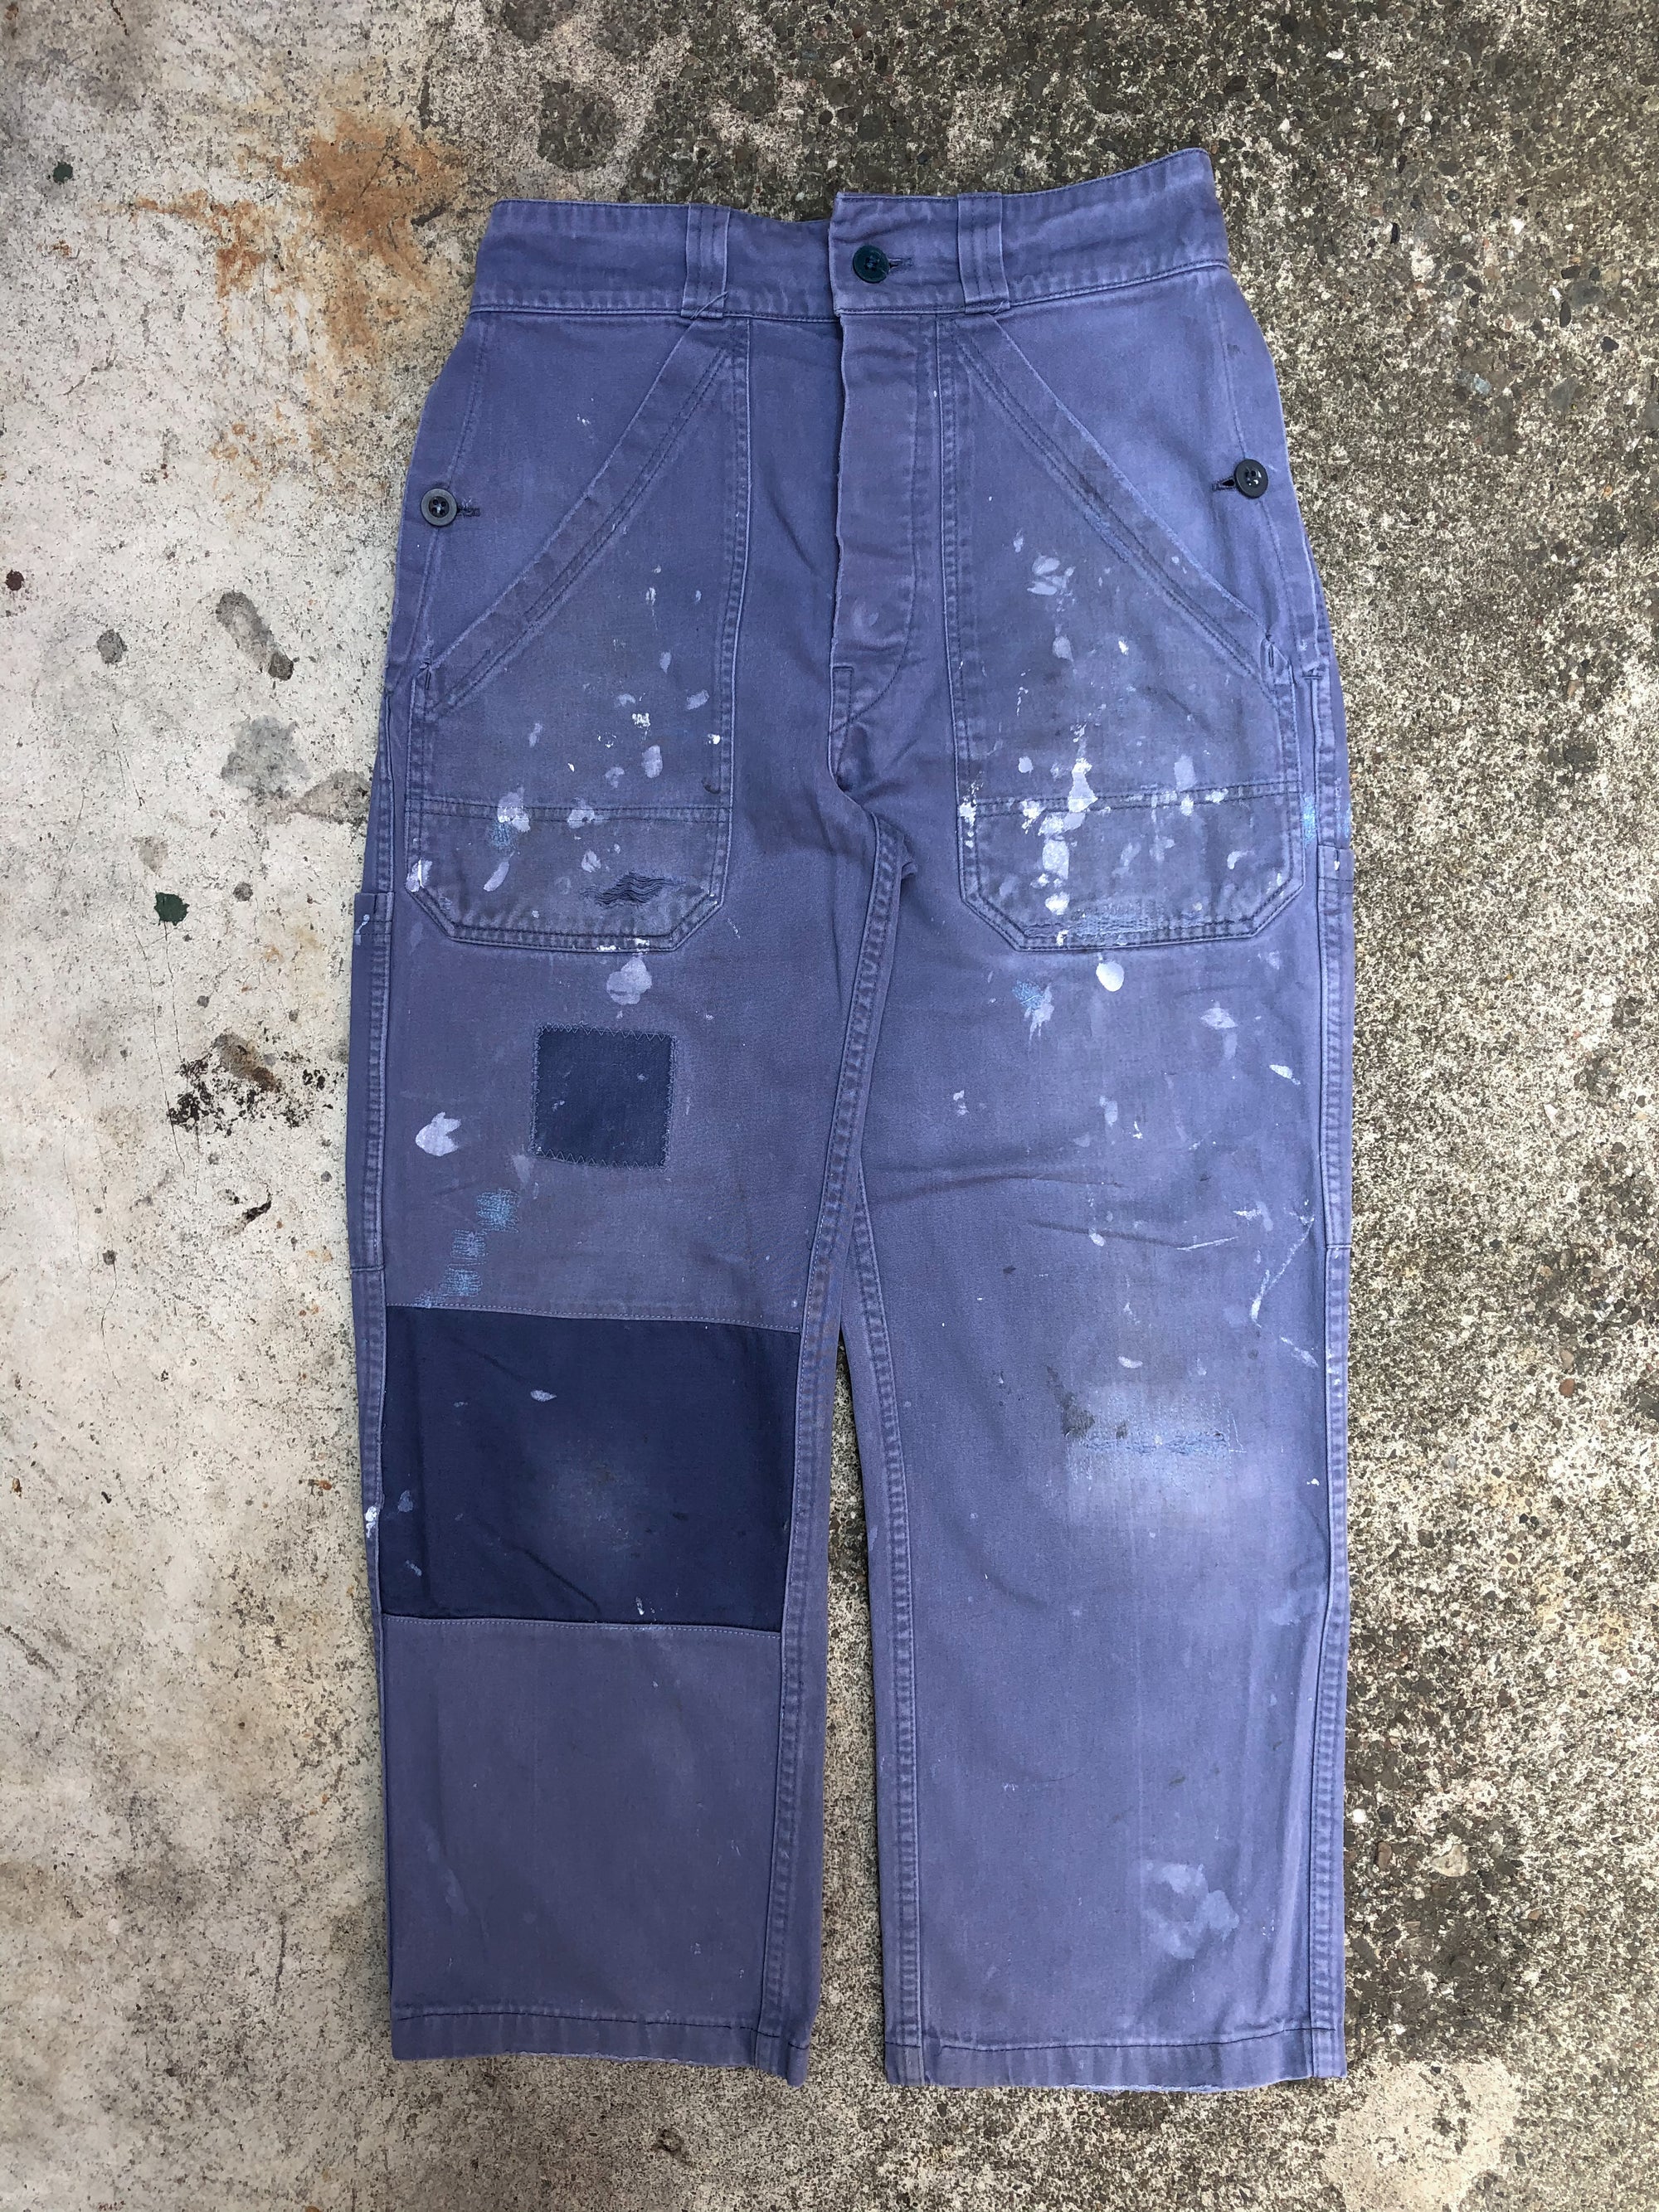 1950s Painted Repaired Patchwork French Work Pants (28X25)